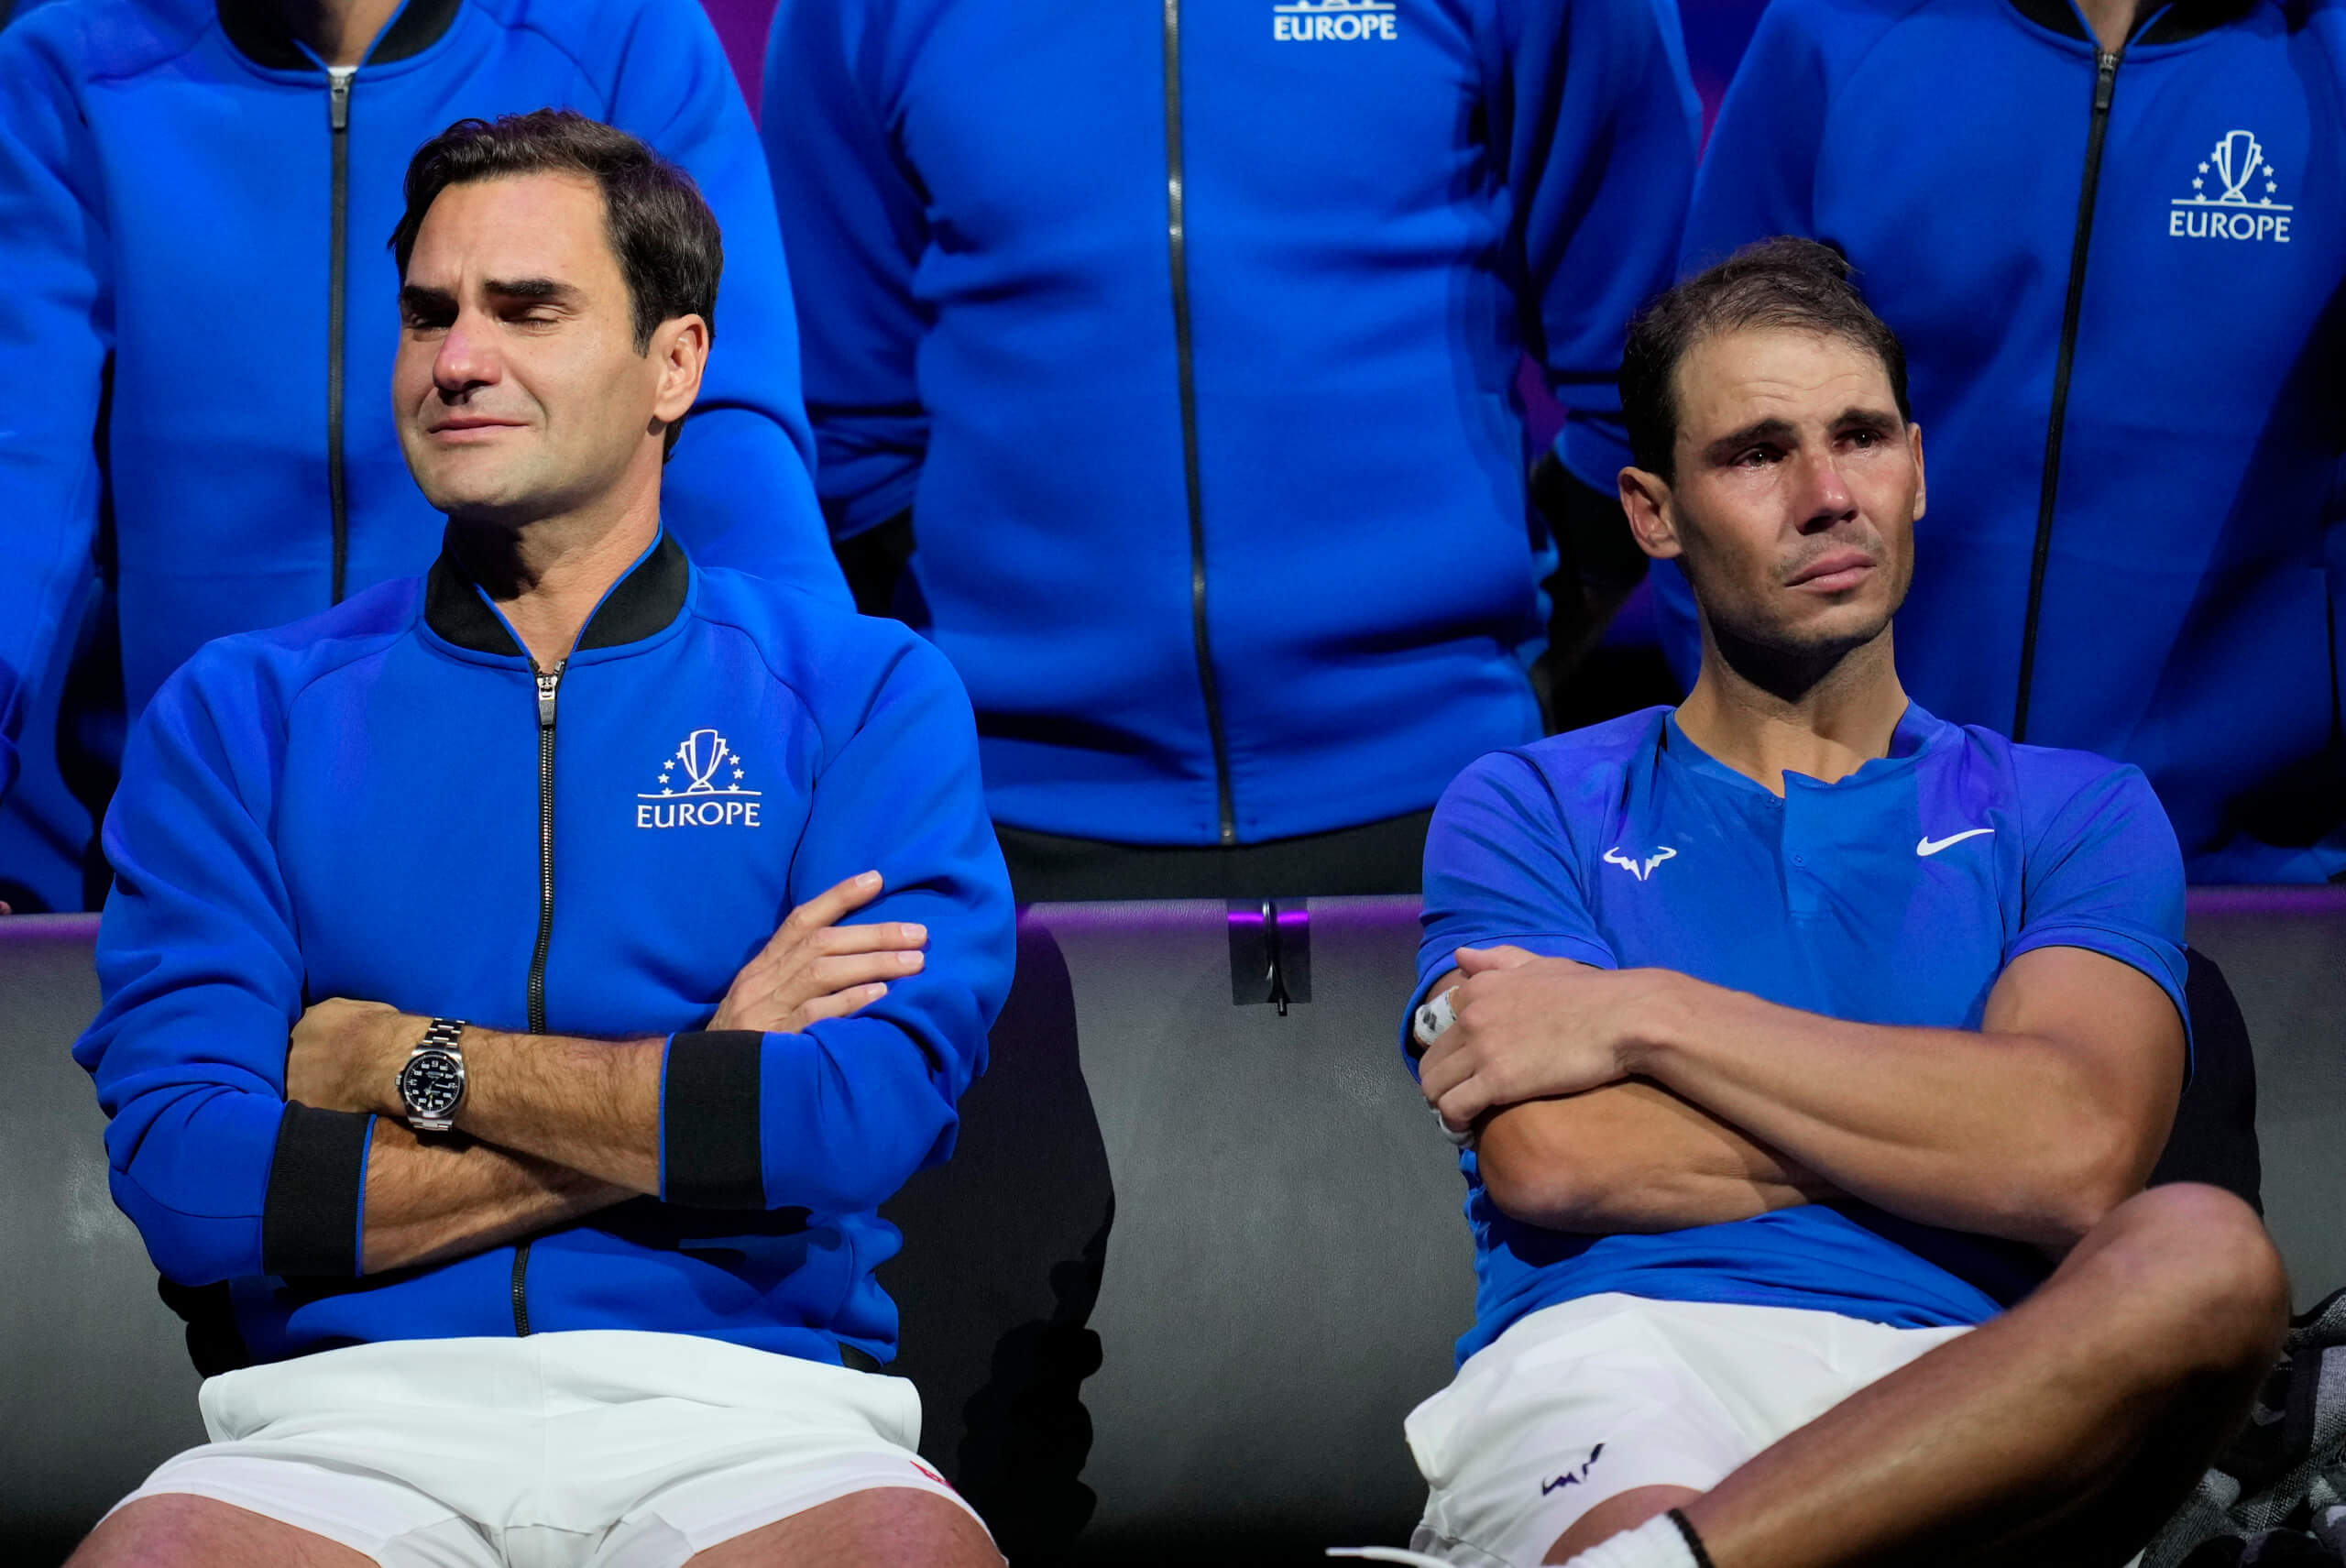 Roger Federer retirement final after he and Nadal lose to Americans Jack Sock and Frances Tiafoe at Laver Cup amNewYork